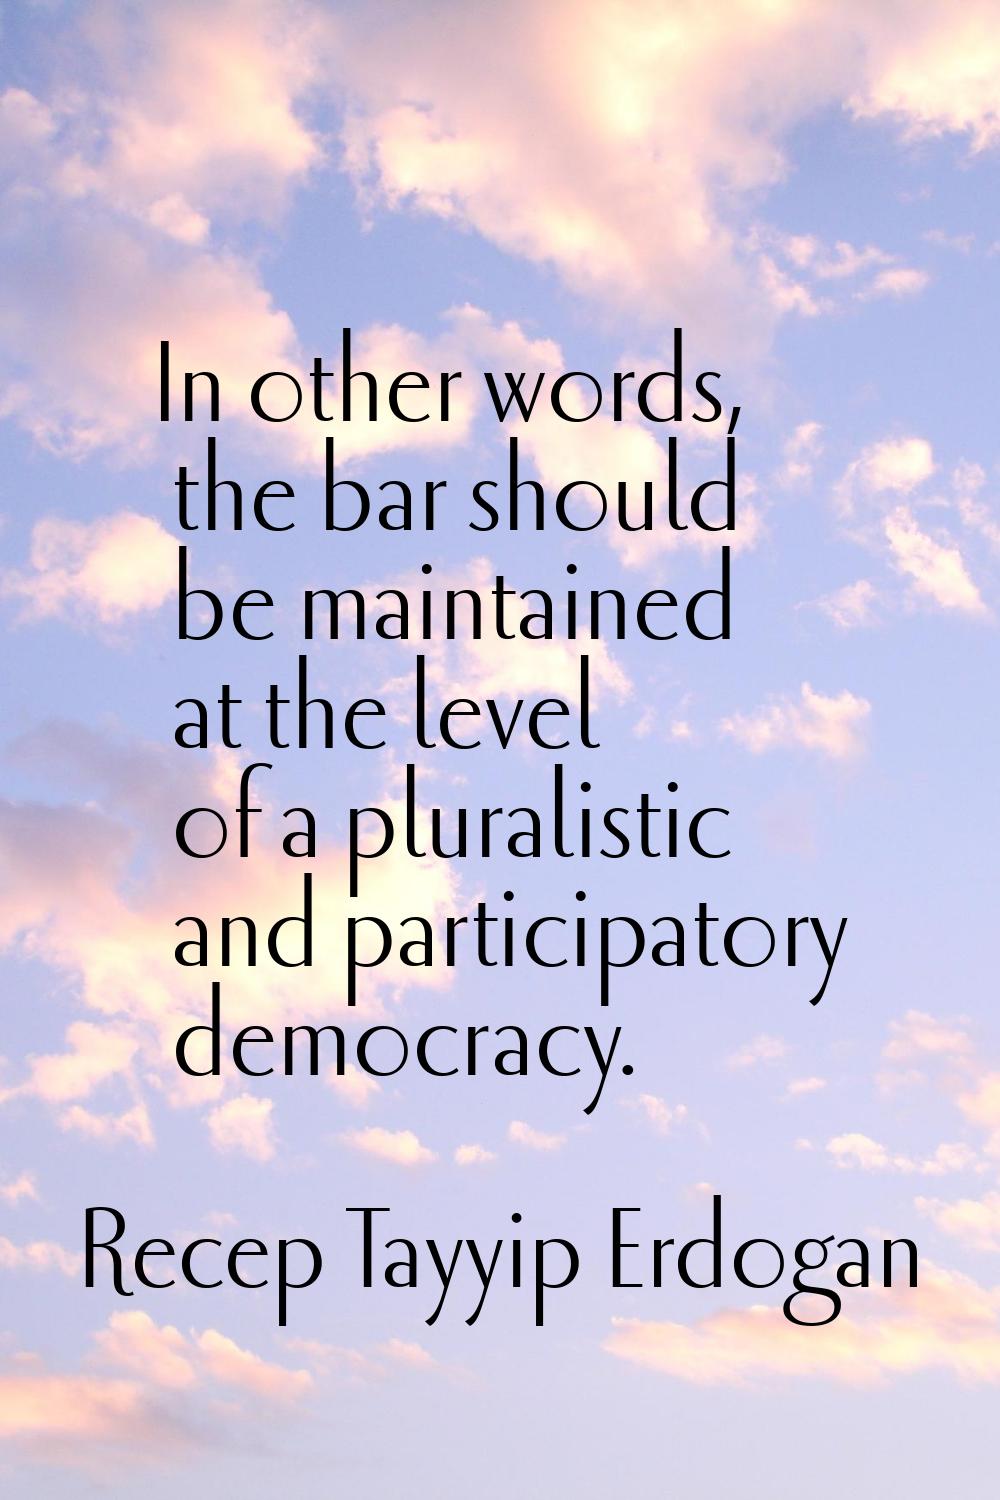 In other words, the bar should be maintained at the level of a pluralistic and participatory democr